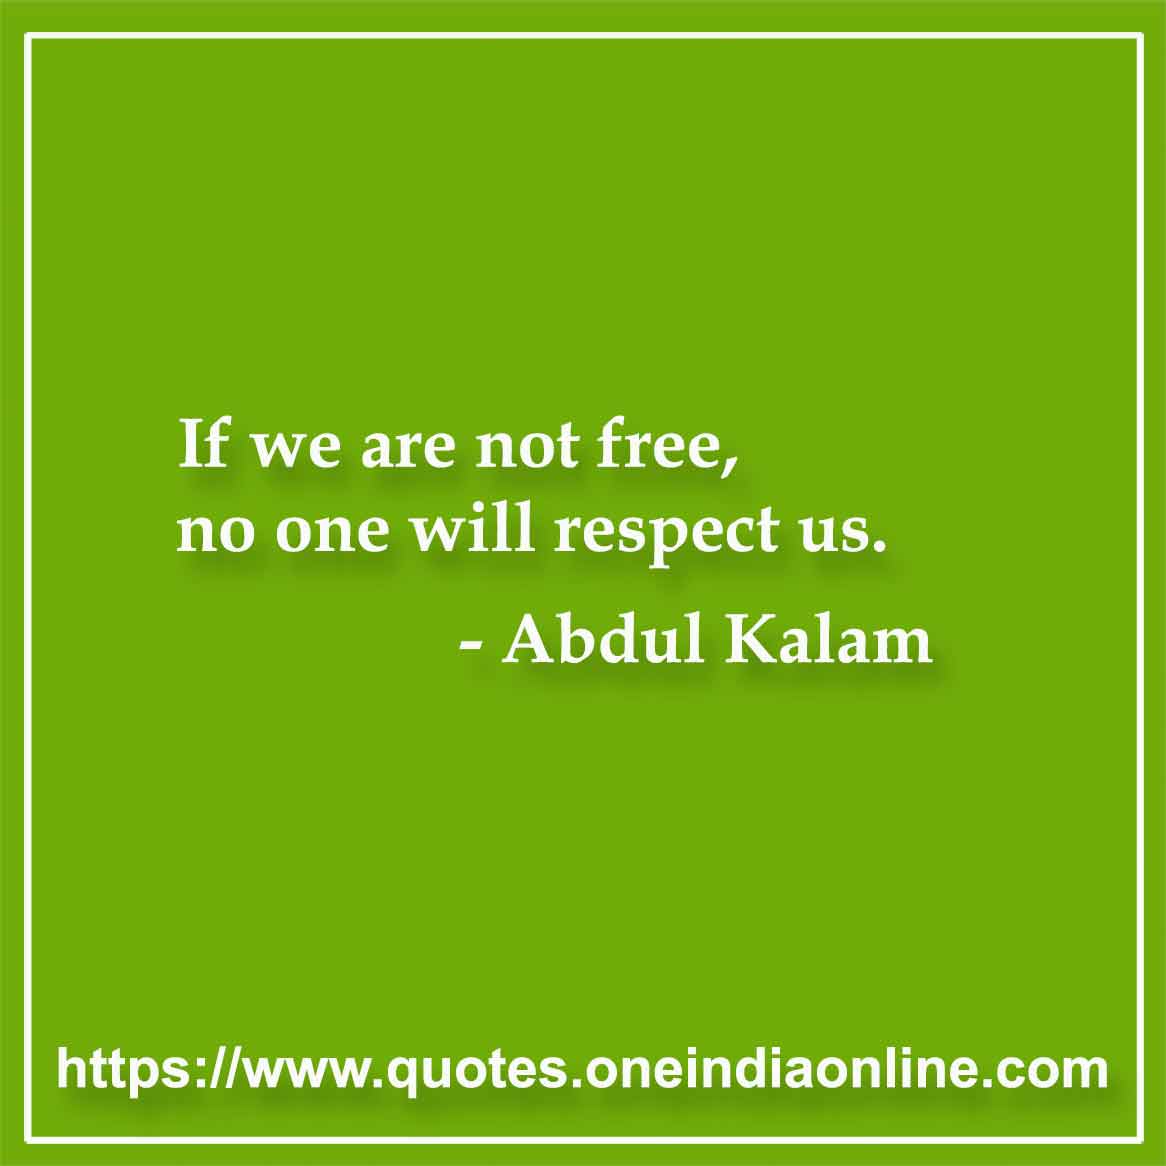 If we are not free, no one will respect us.
